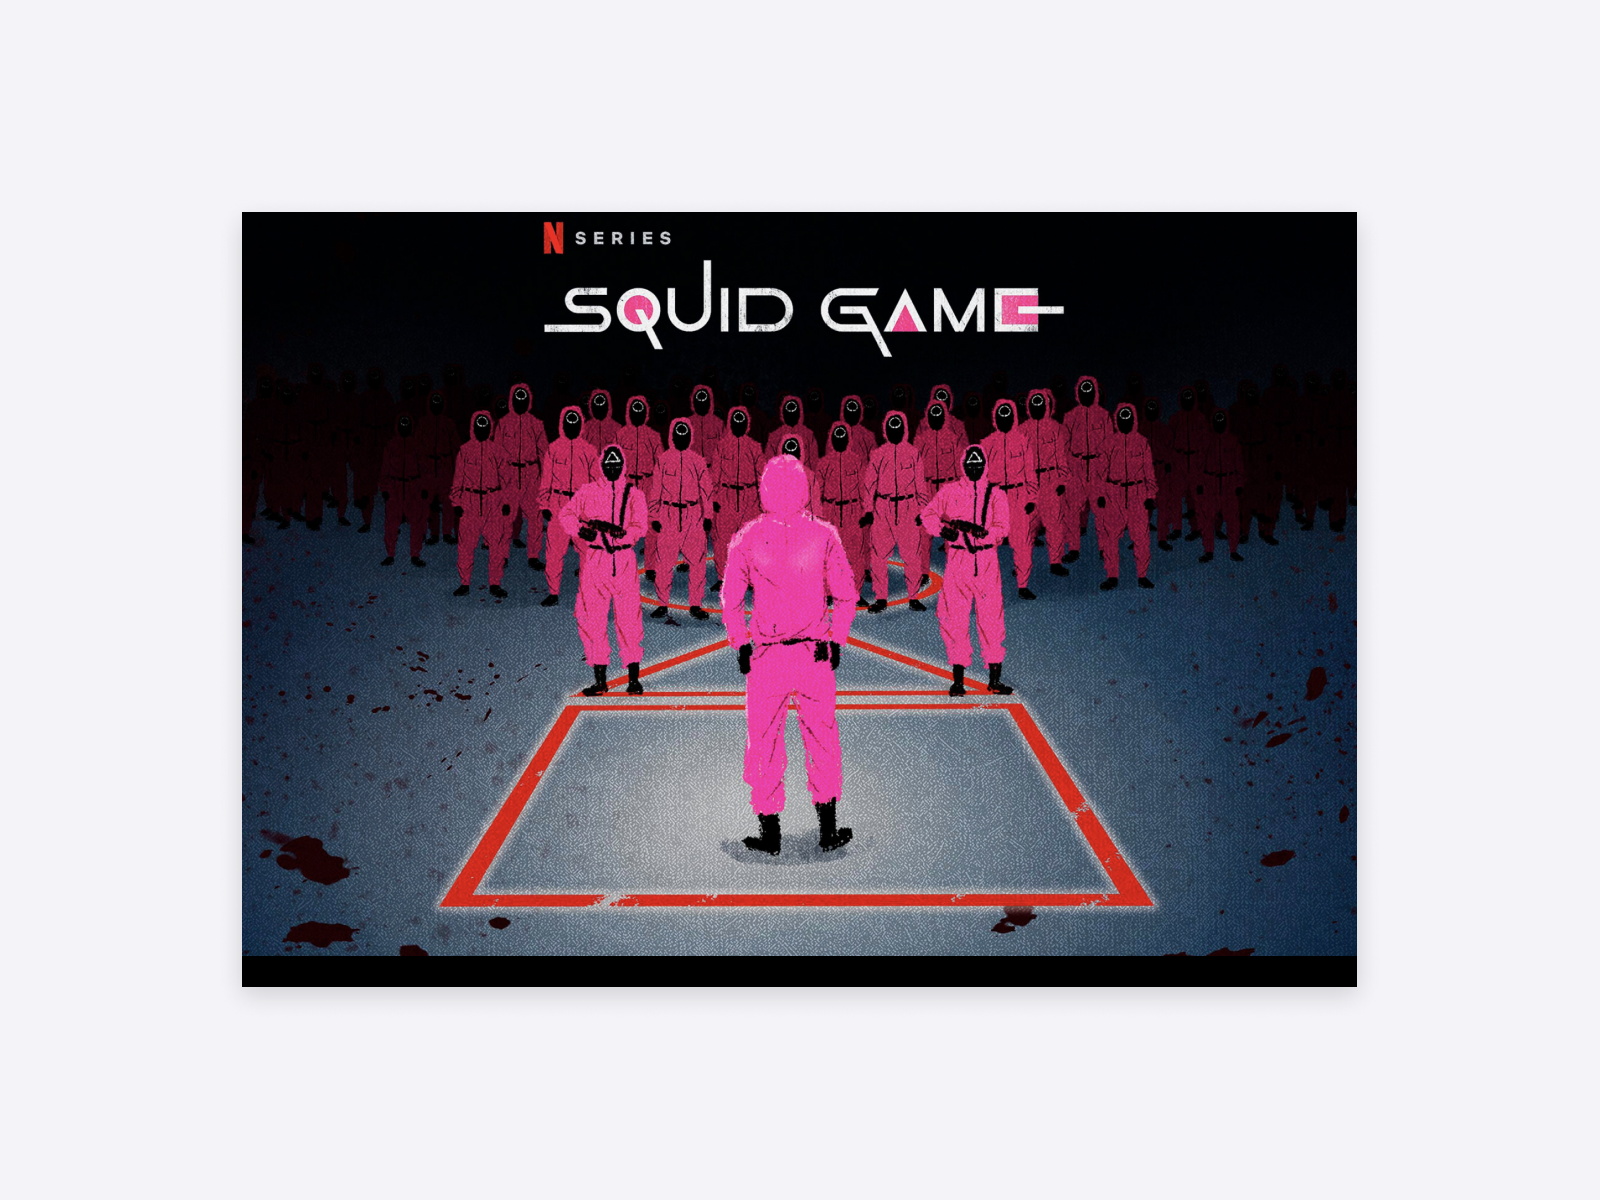 Squid game poster, an example for tangled typography